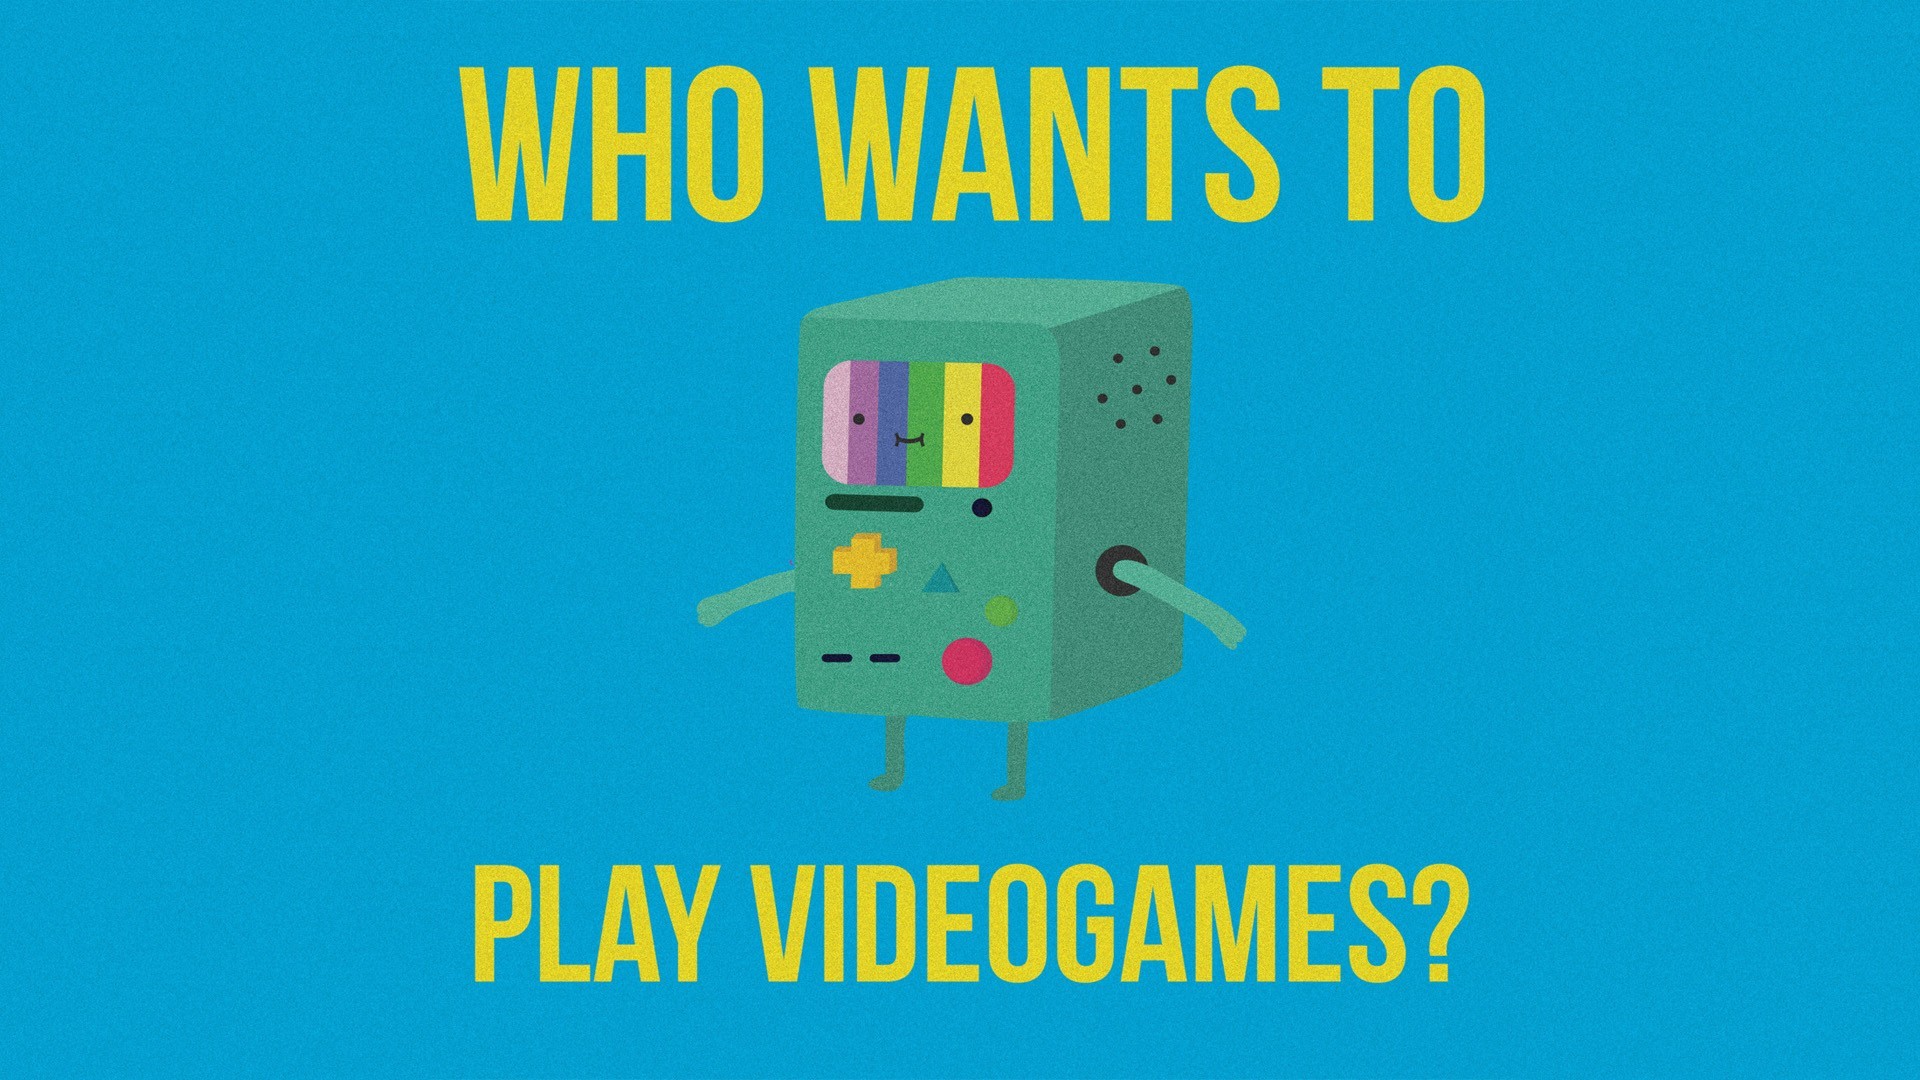 1920x1080 Who wants to play videogames? (Beemo wallpaper) ...